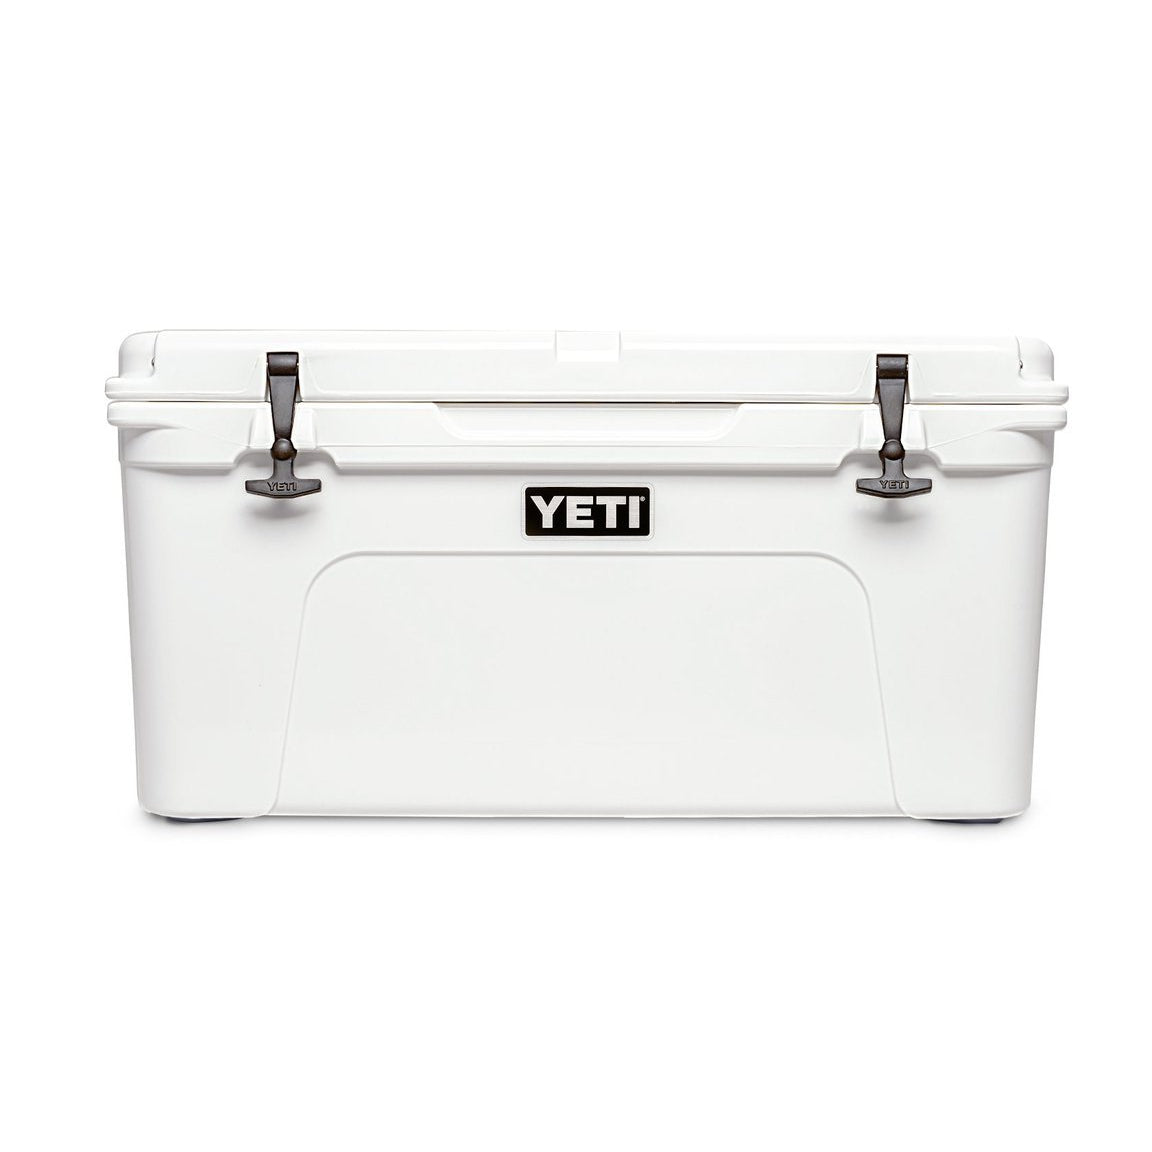 Yeti Tundra 65 Cooler-FISHING-Yeti Coolers-WHITE-Kevin's Fine Outdoor Gear & Apparel